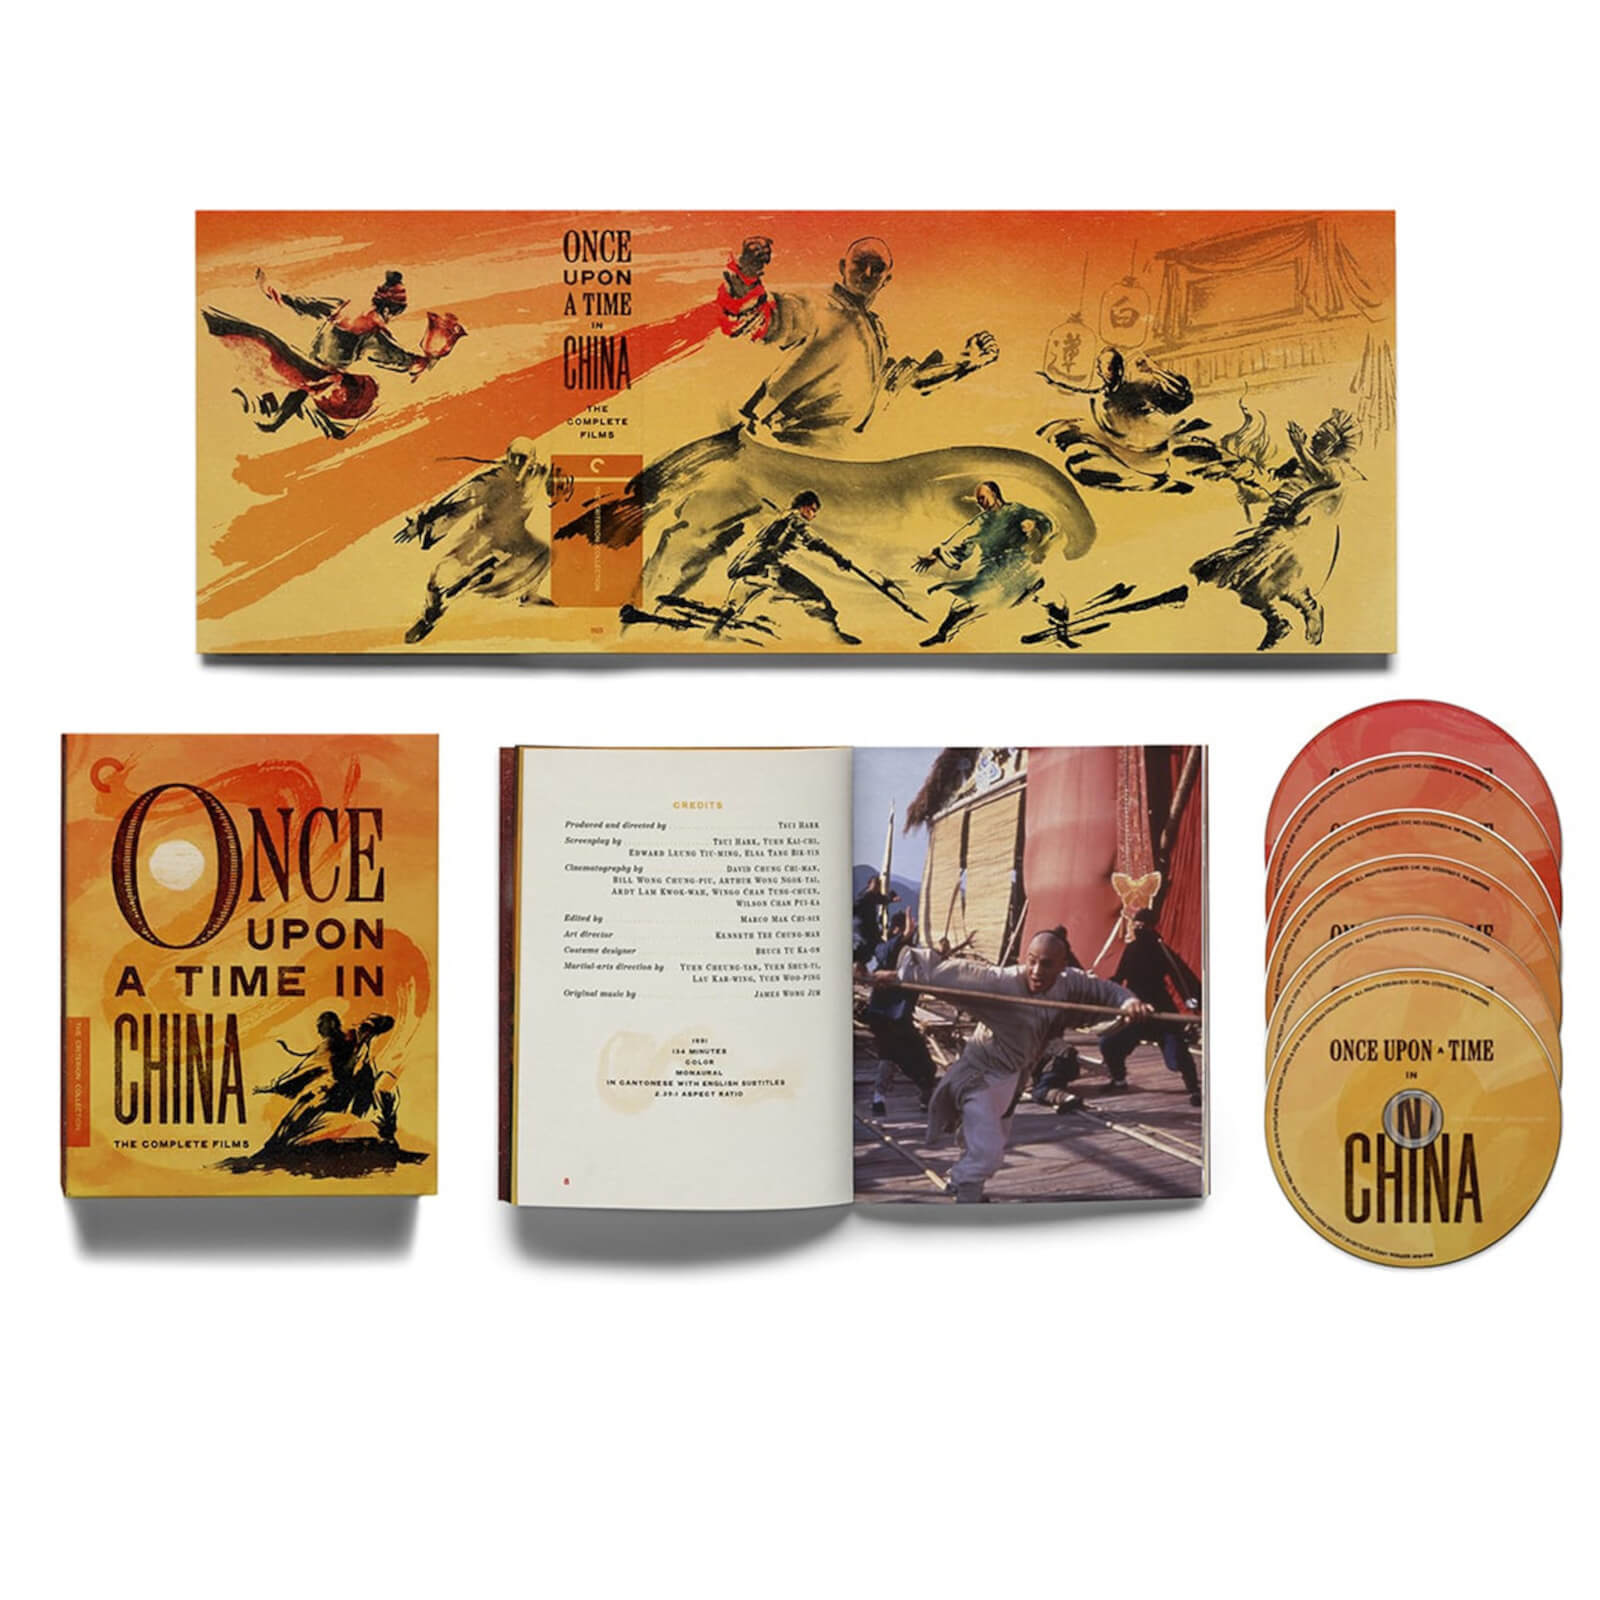 Once Upon a Time in China: The Complete Films - The Criterion Collection (US Import)